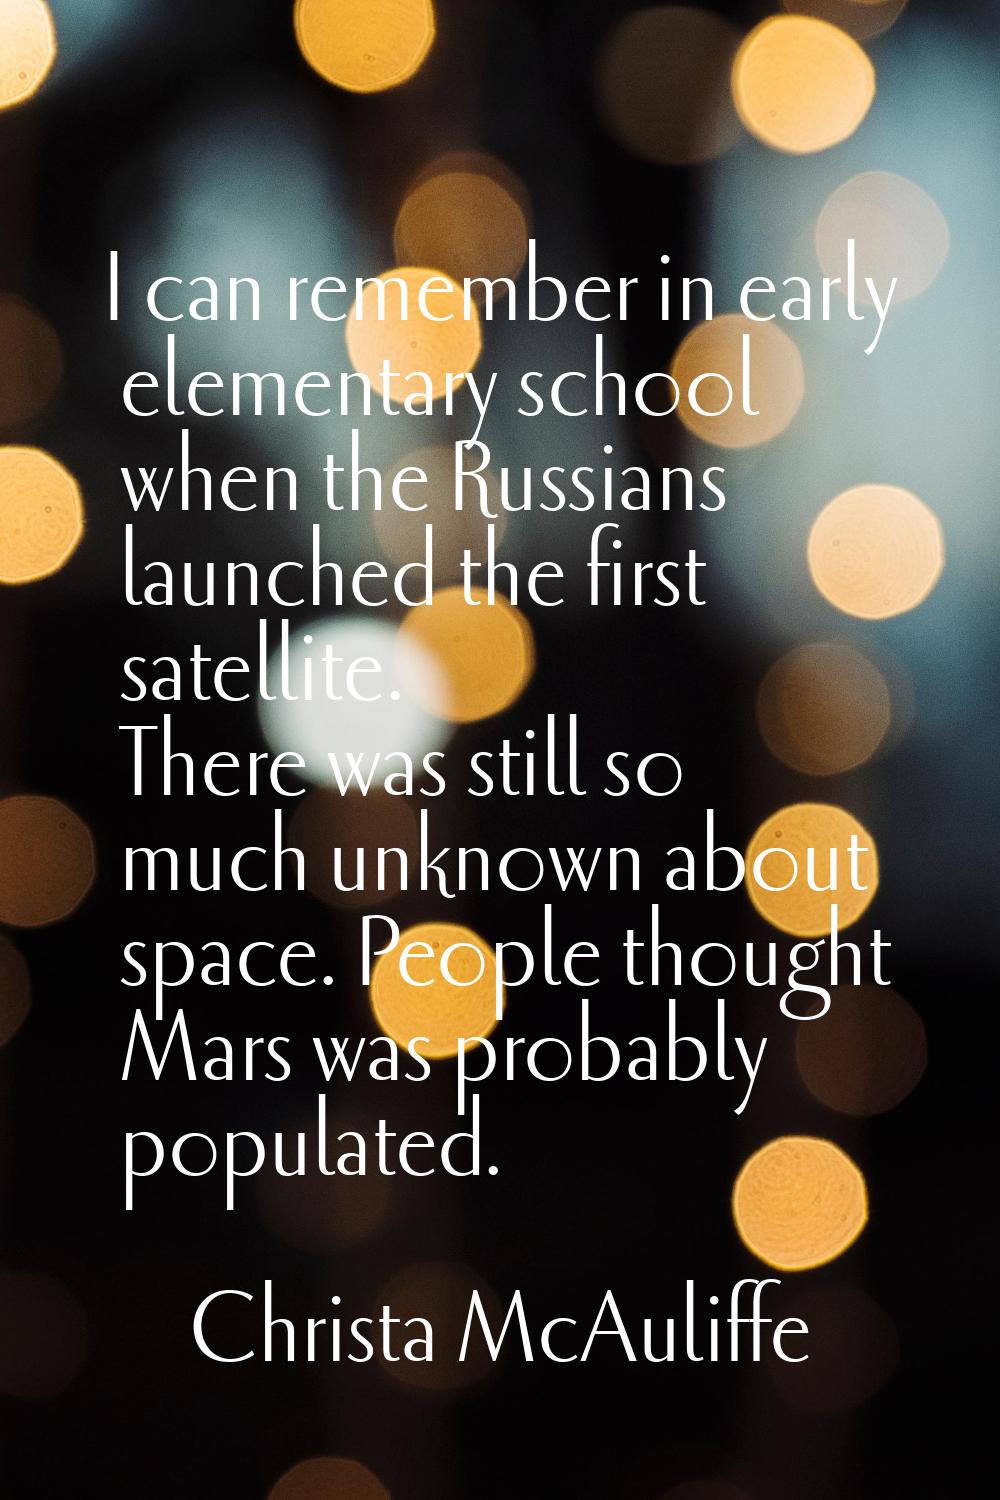 I can remember in early elementary school when the Russians launched the first satellite. There was